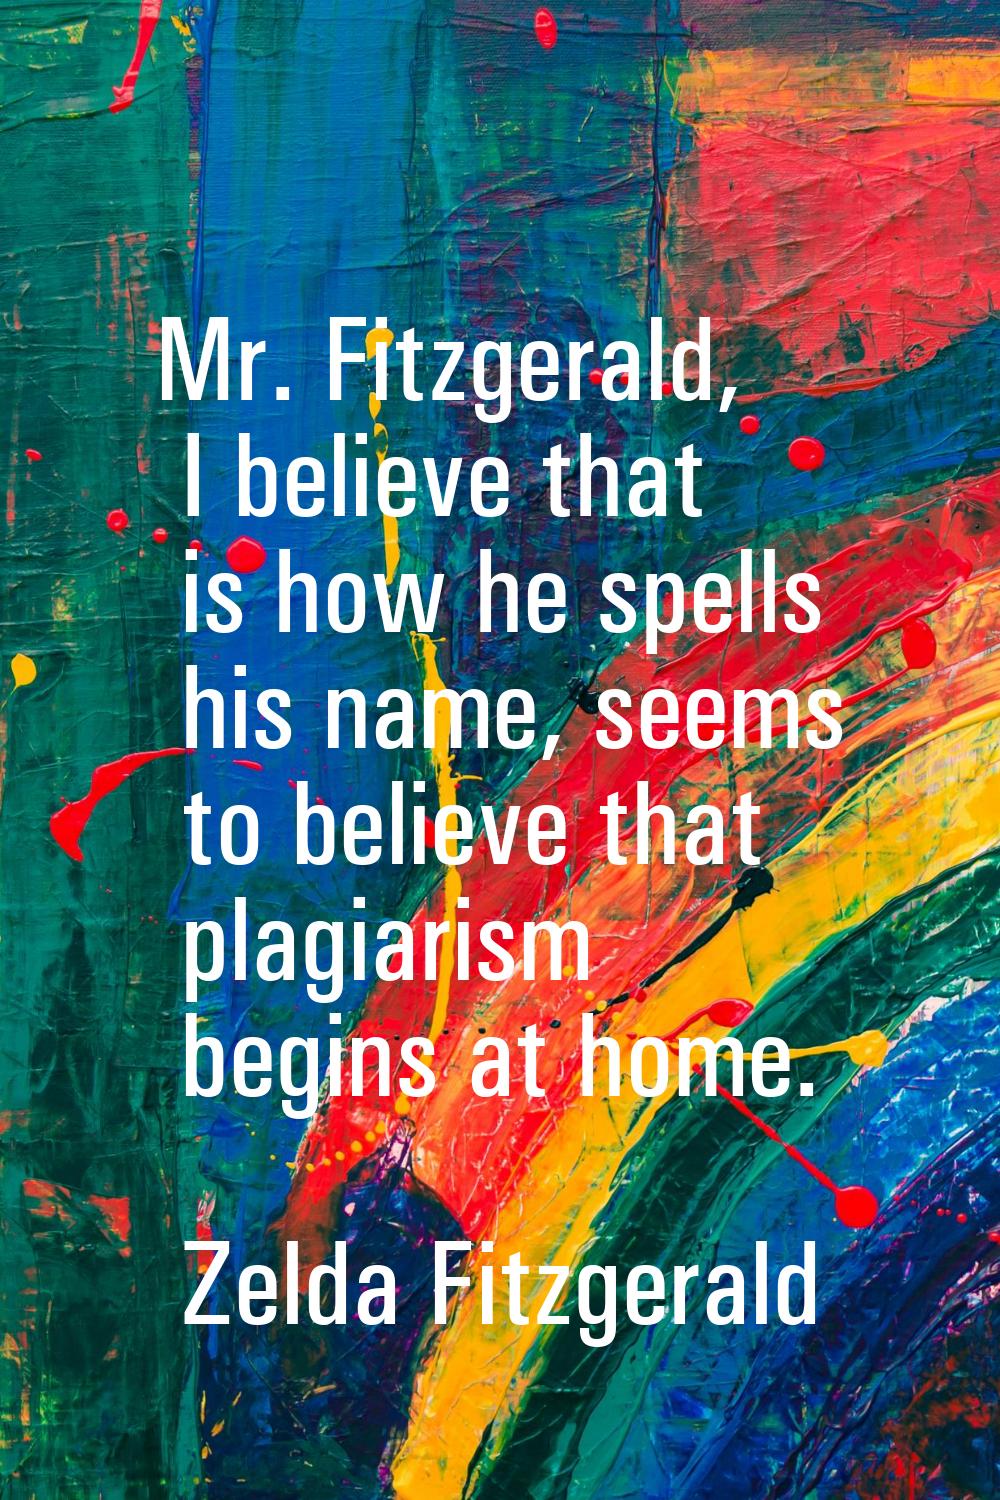 Mr. Fitzgerald, I believe that is how he spells his name, seems to believe that plagiarism begins a